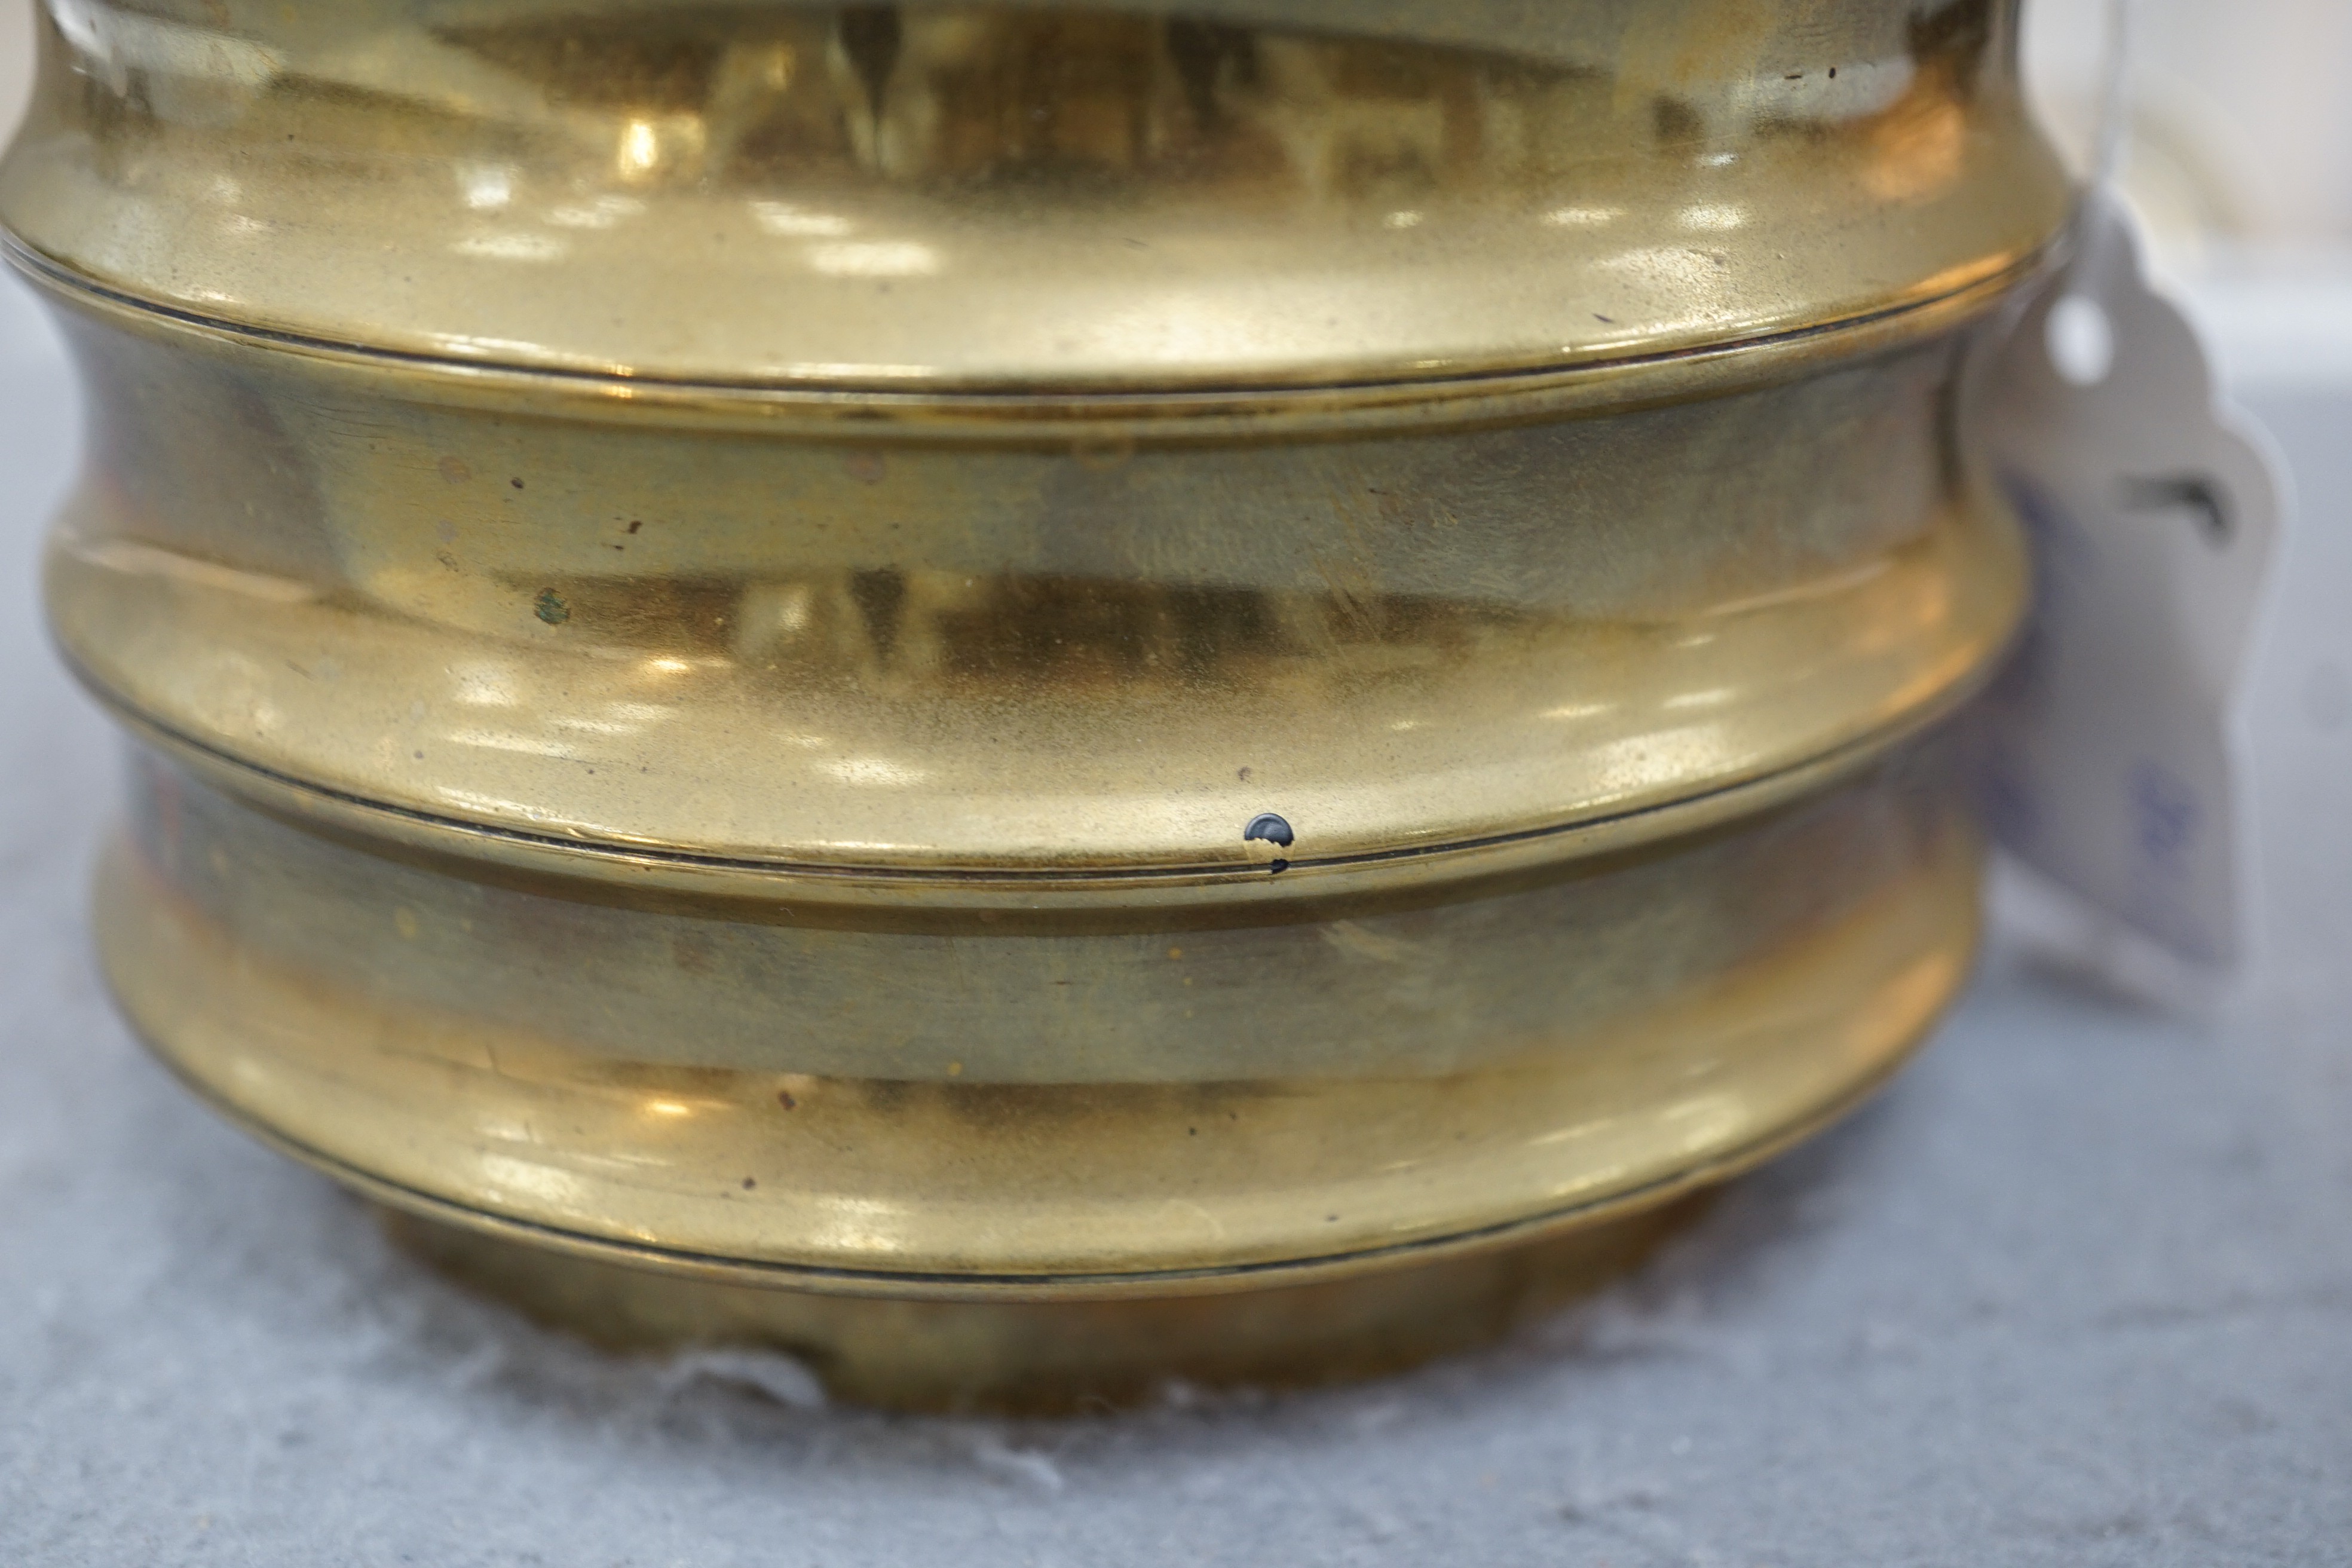 A Chinese bronze censer, two character Xuande seal mark, 18th century, 10.4cm high, 12.1cm diameter, small dents